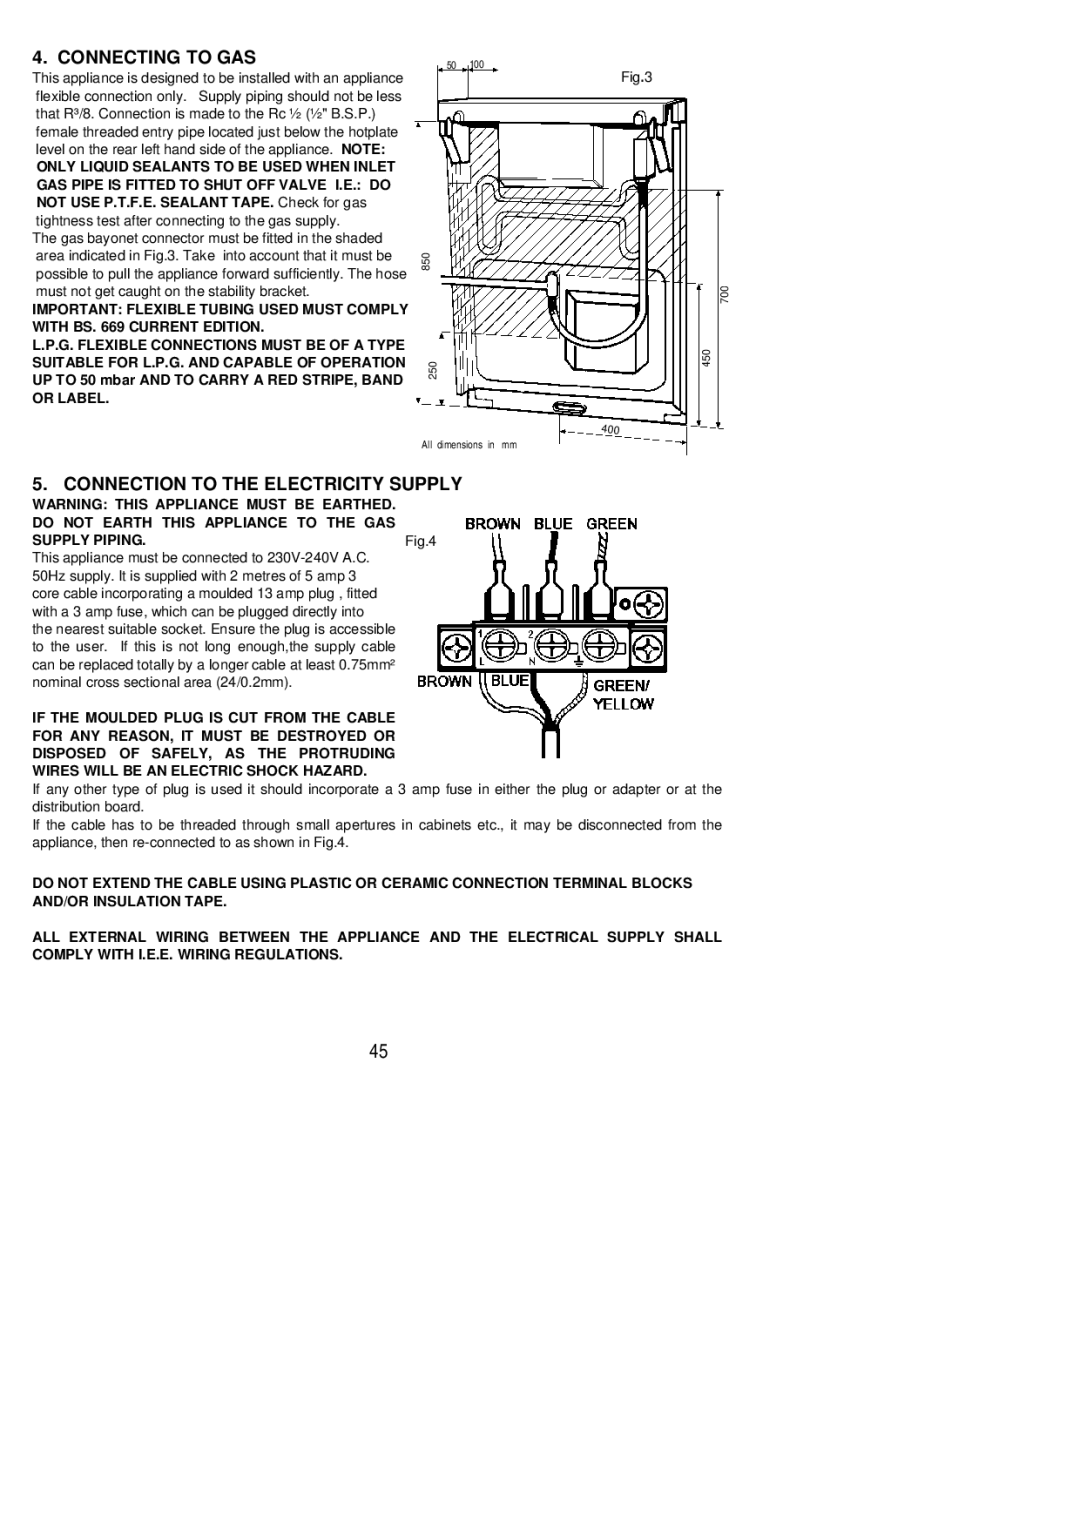 Electrolux SG 505X installation instructions Connecting to GAS, Connection to the Electricity Supply 